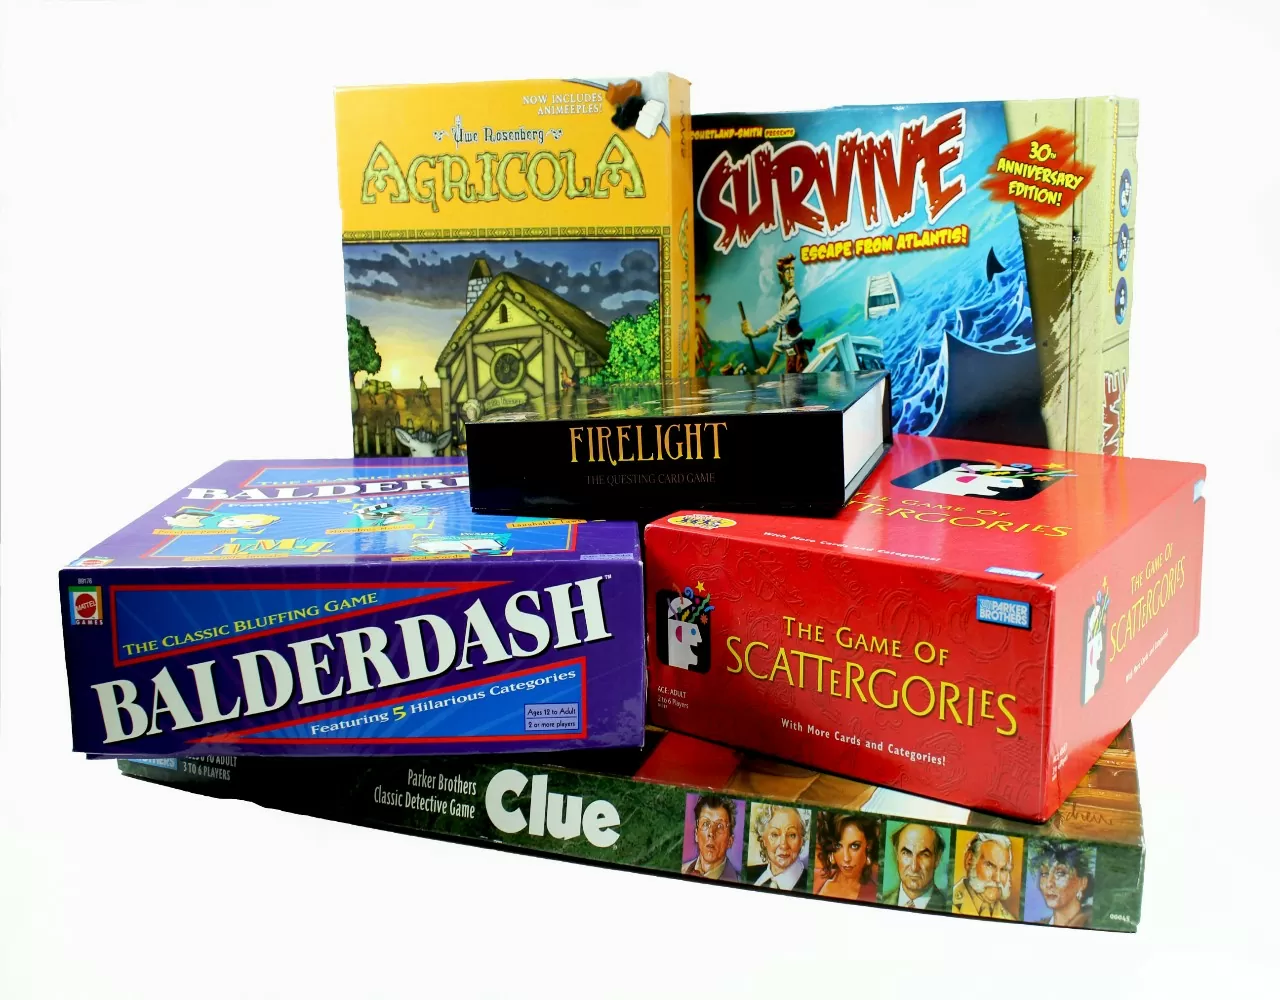 PrintNinja provides you with a helpful tips and tricks to make funding your custom board game attainable.